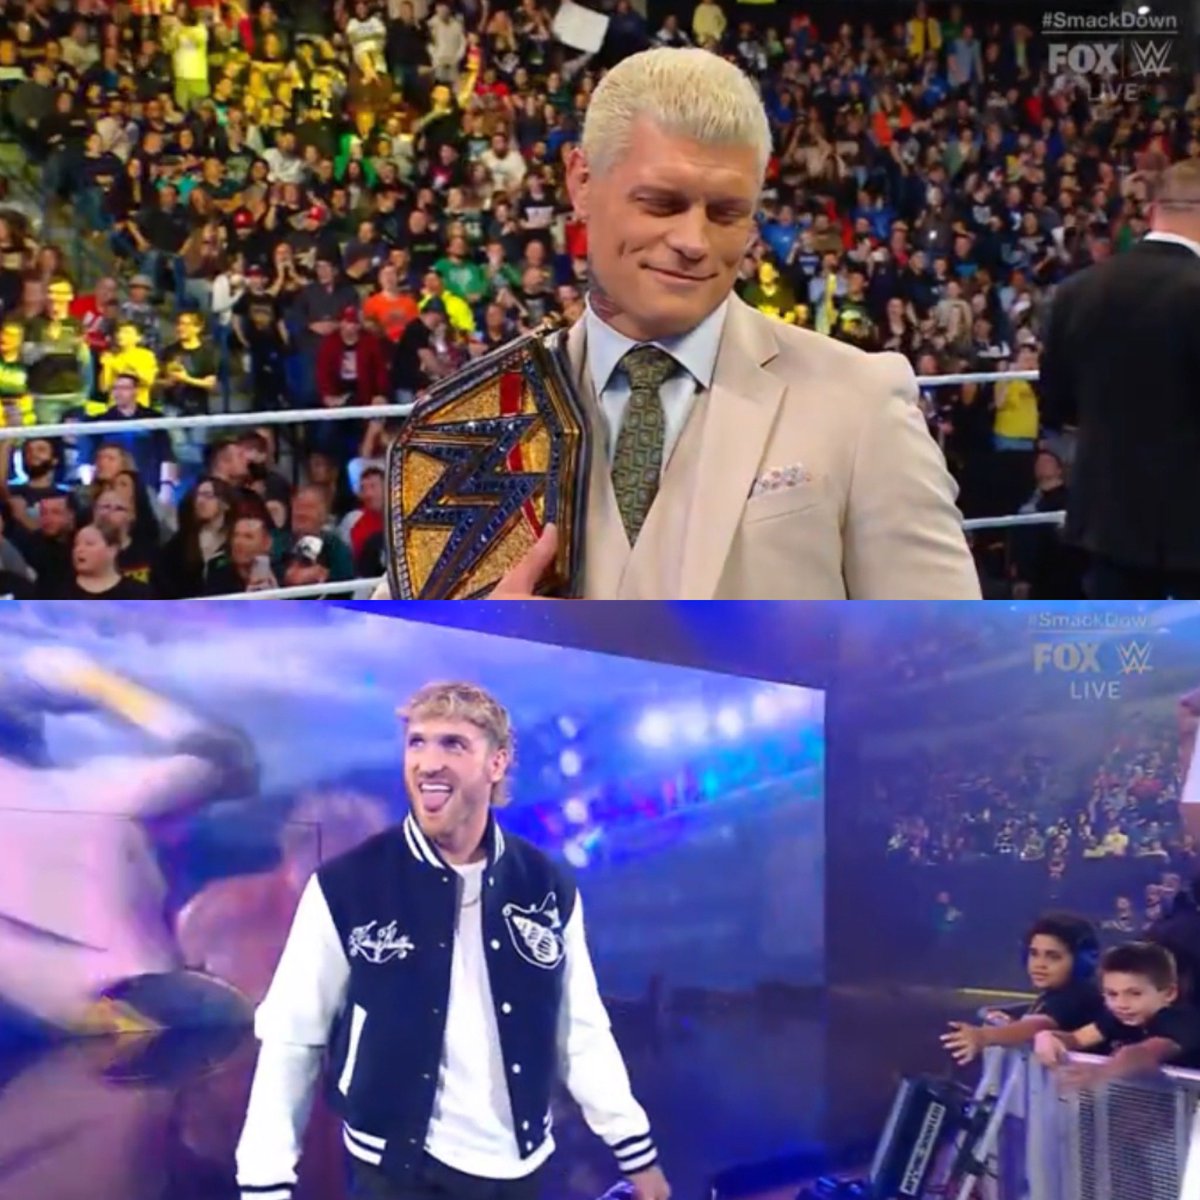 Cody Rhodes should put over Logan Paul at Saudi Arabia Cody has already accomplished everything, Now its time for him to put younger talent over. #SmackDown